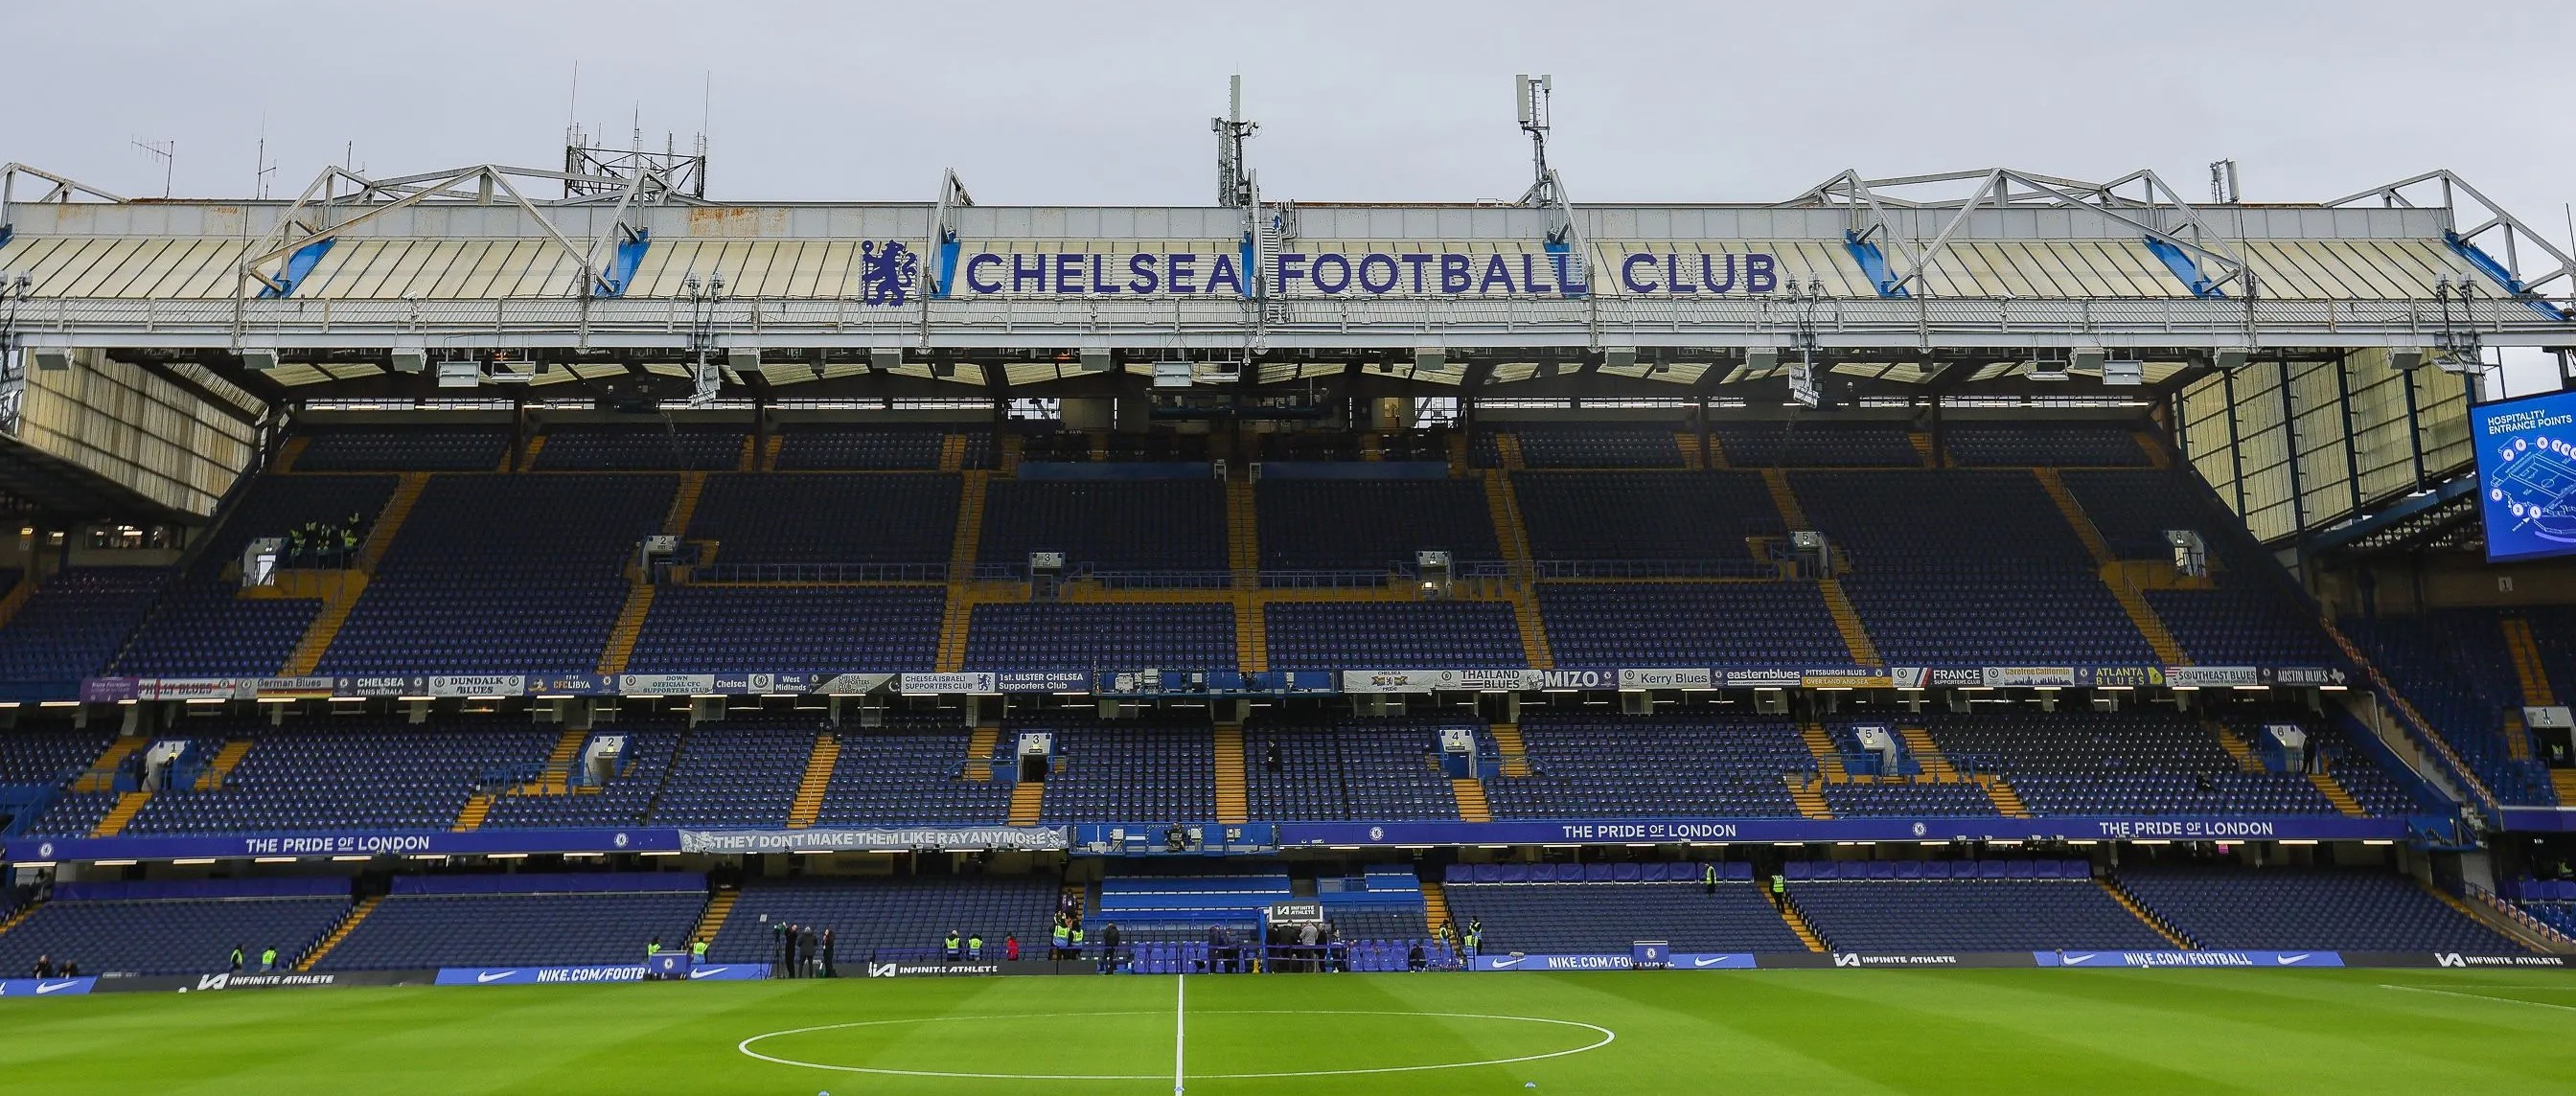 Chelsea's home looks old-fashioned when contrasted with the future image